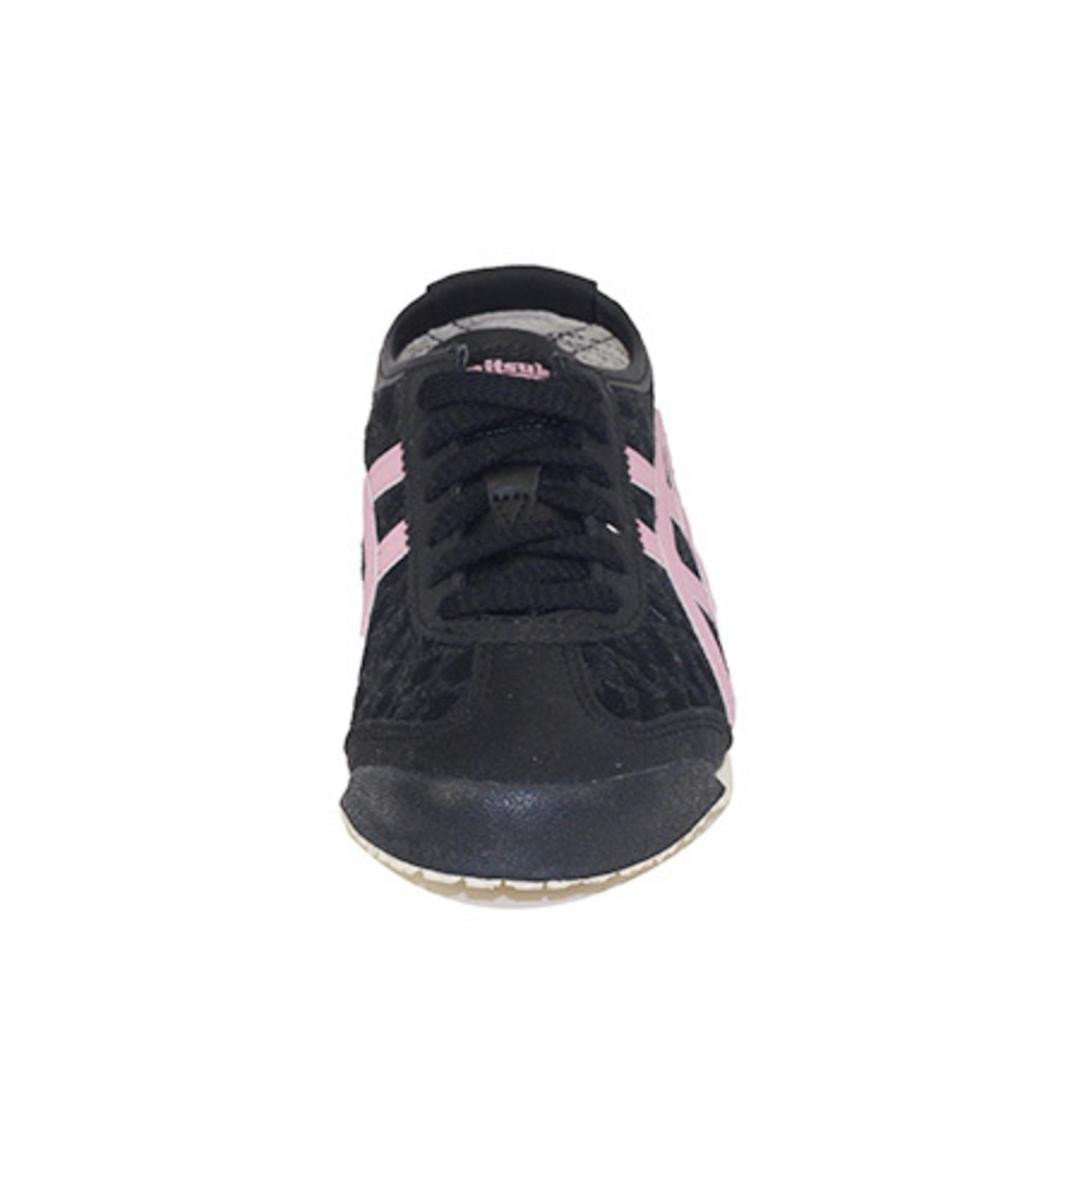 Onitsuka Tiger for Preschool: Mexico 66 PS Black/Pink Sneakers